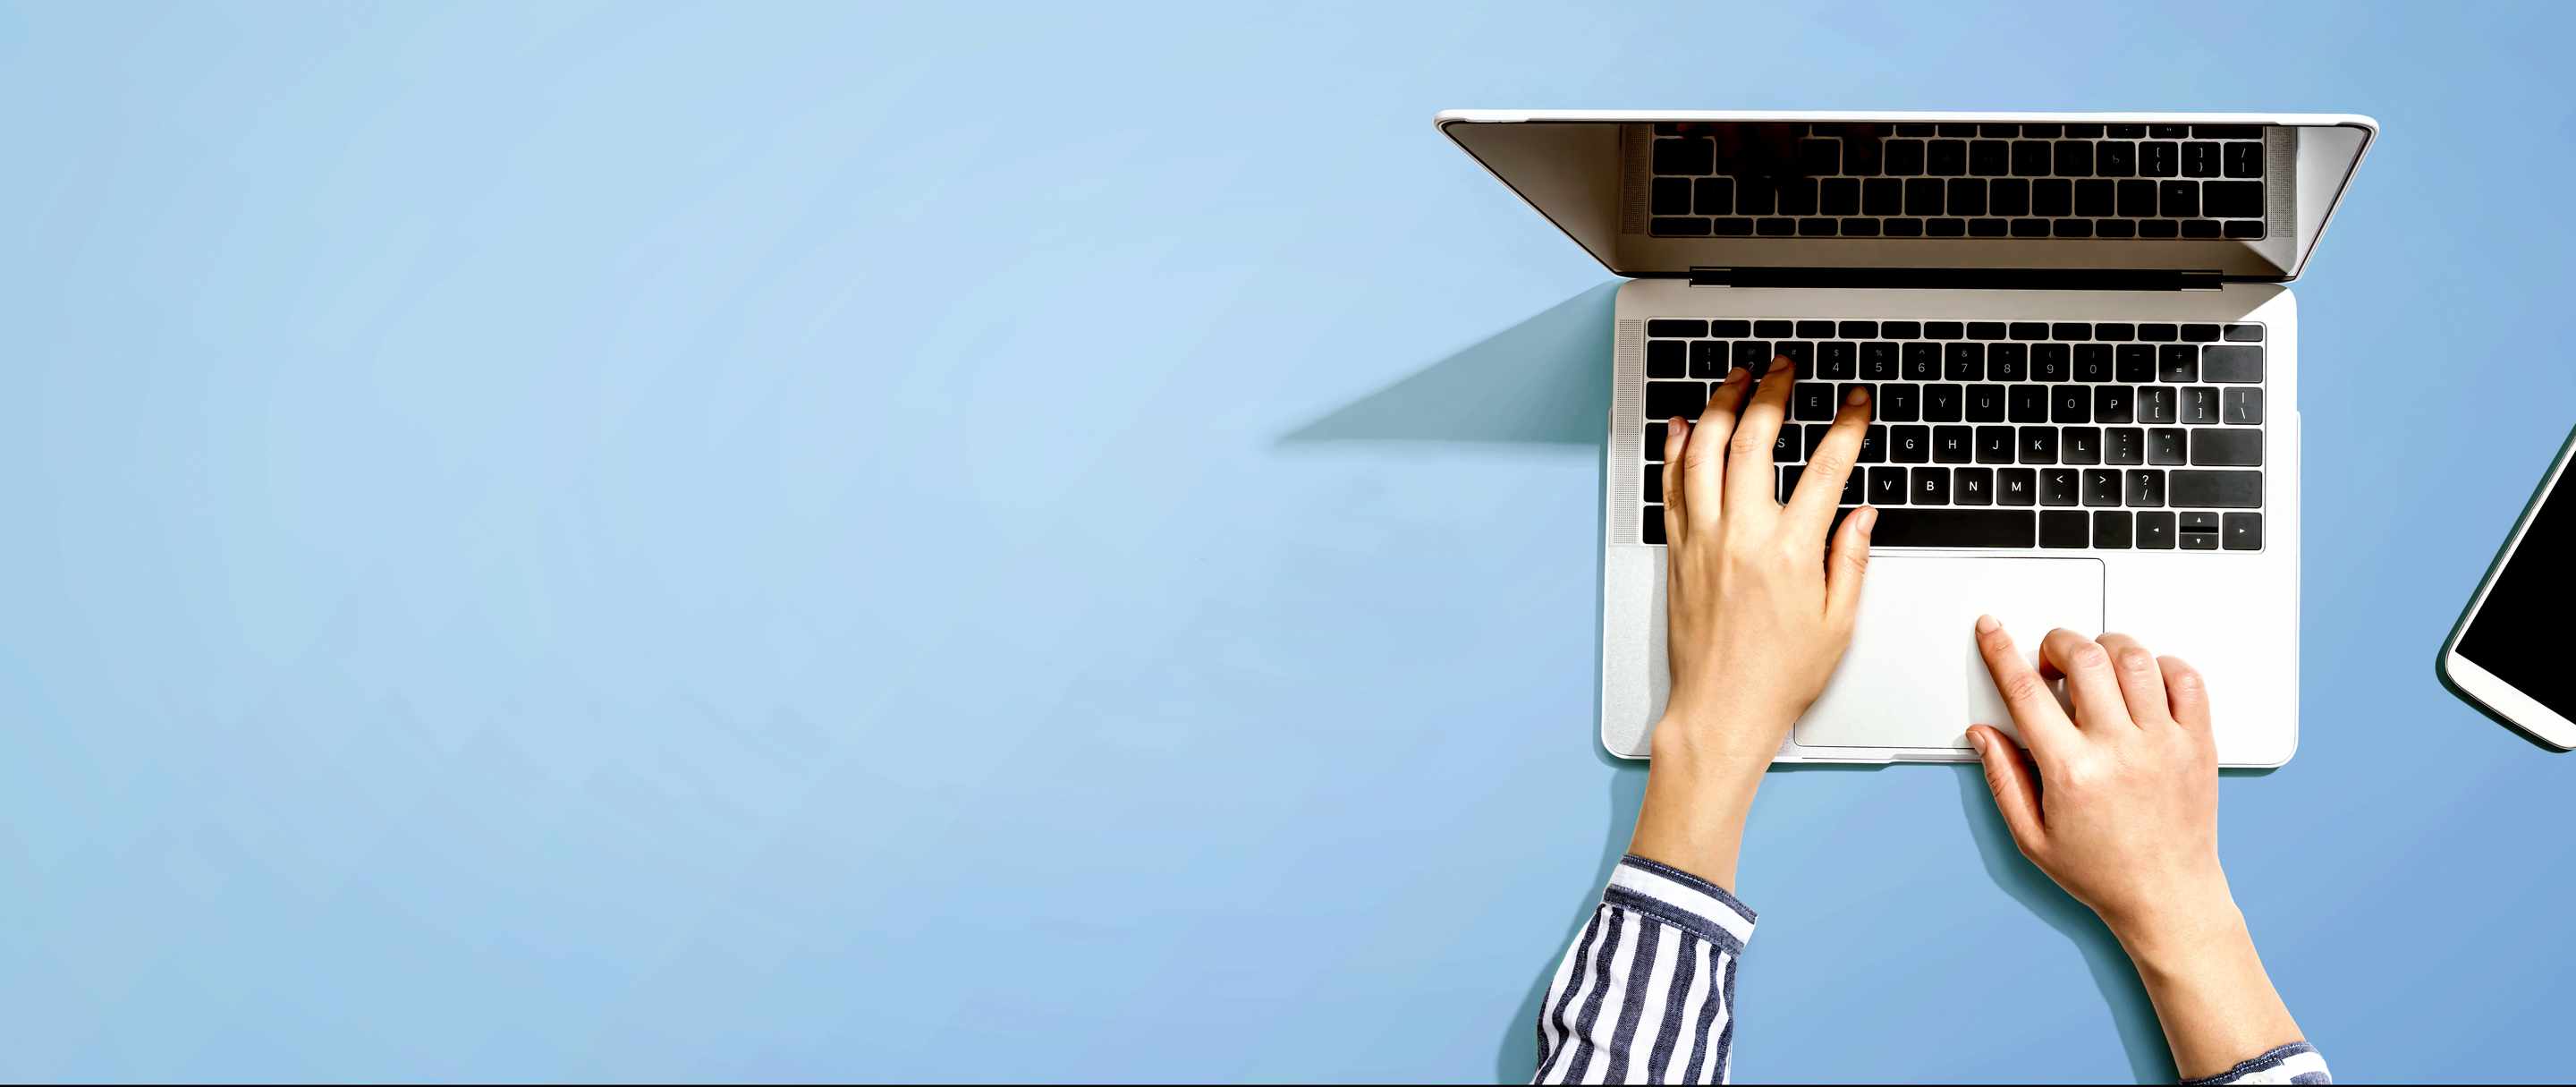 image of someone working on a laptop with blue background